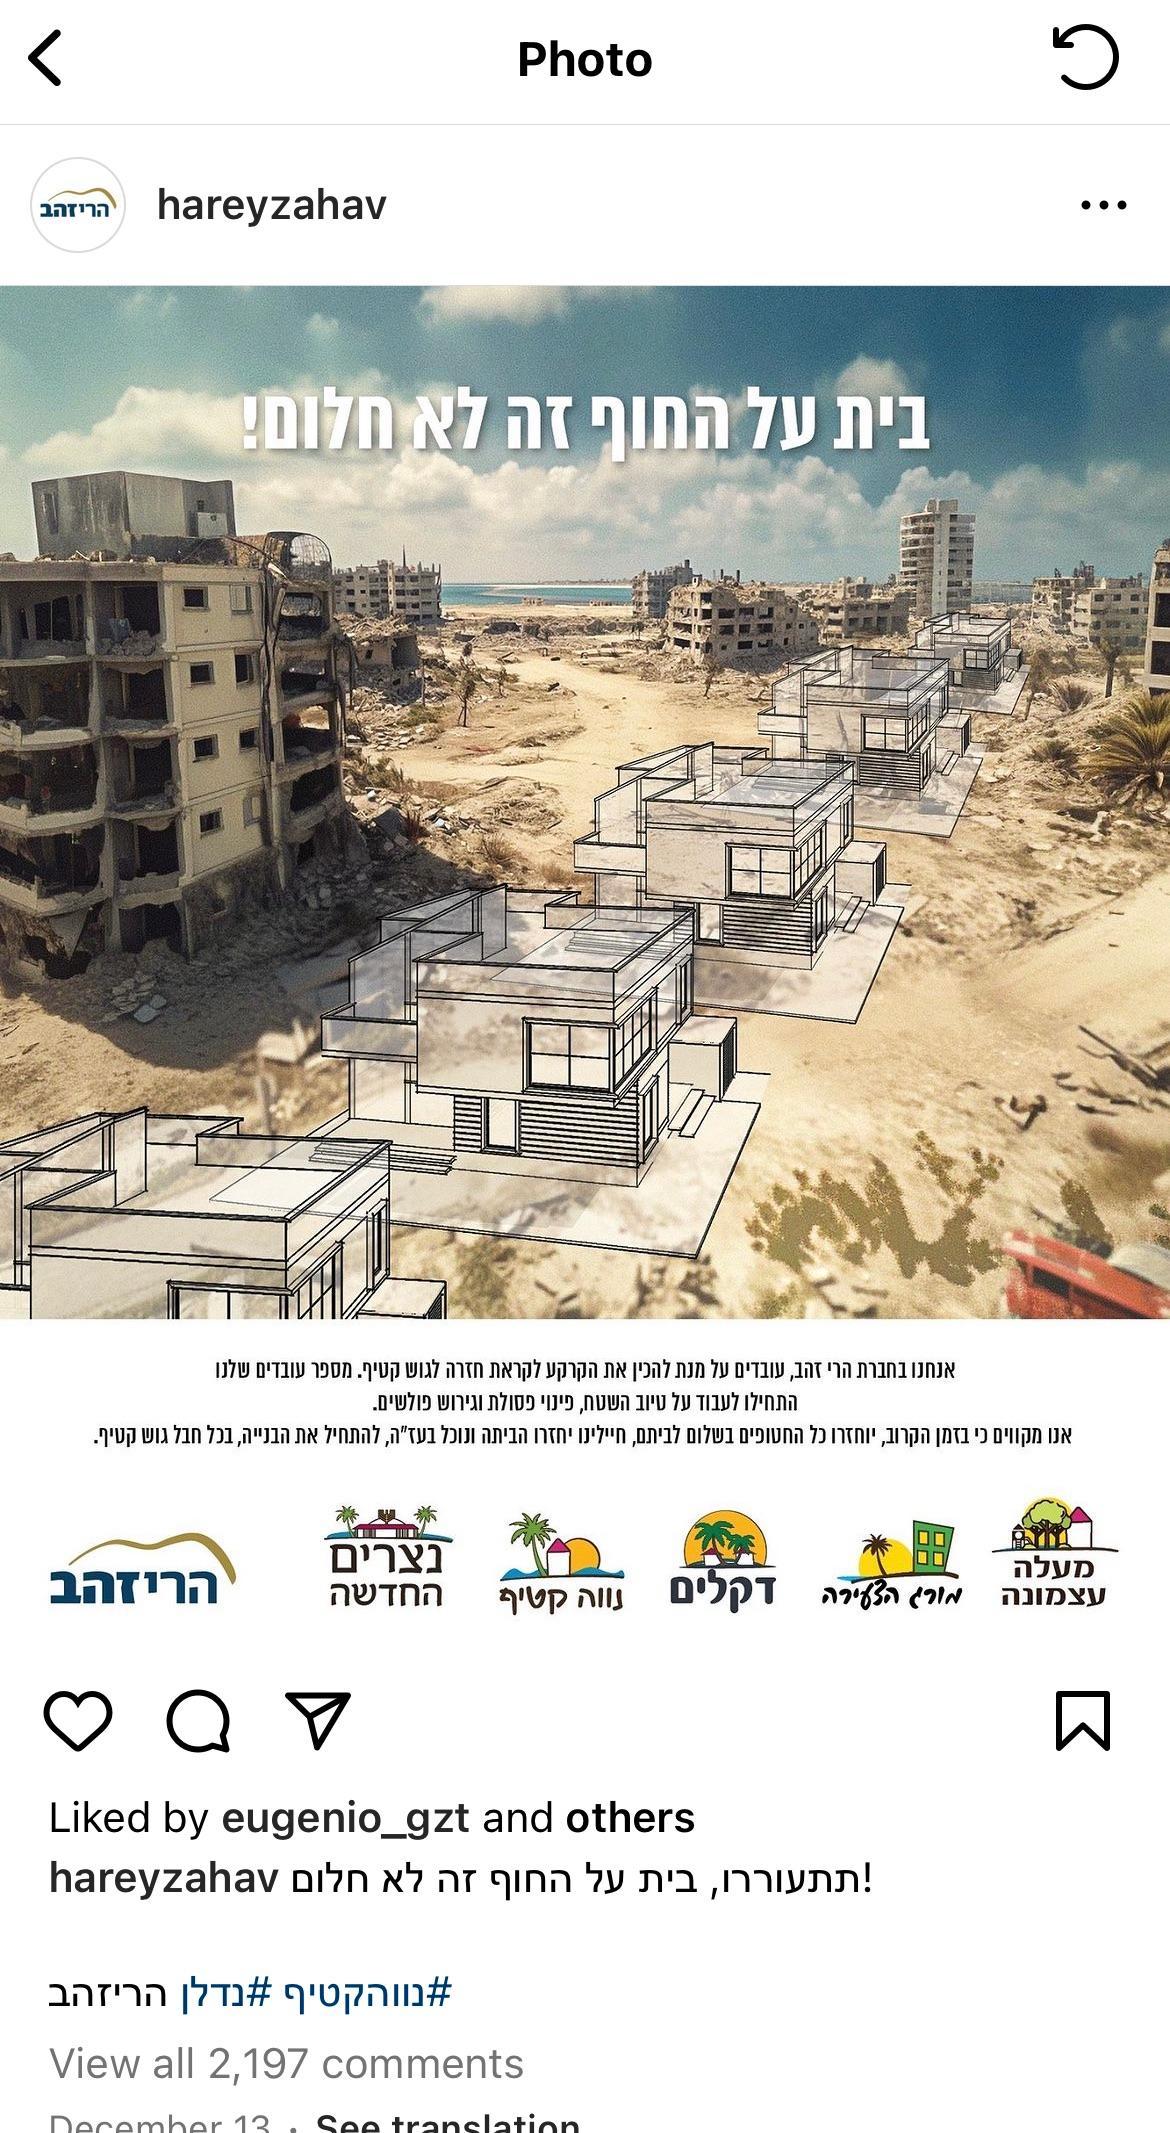 An ad from an Israeli real estate company, advertising sea front home in Gaza, transposed on the rubble of Palestinian homes.